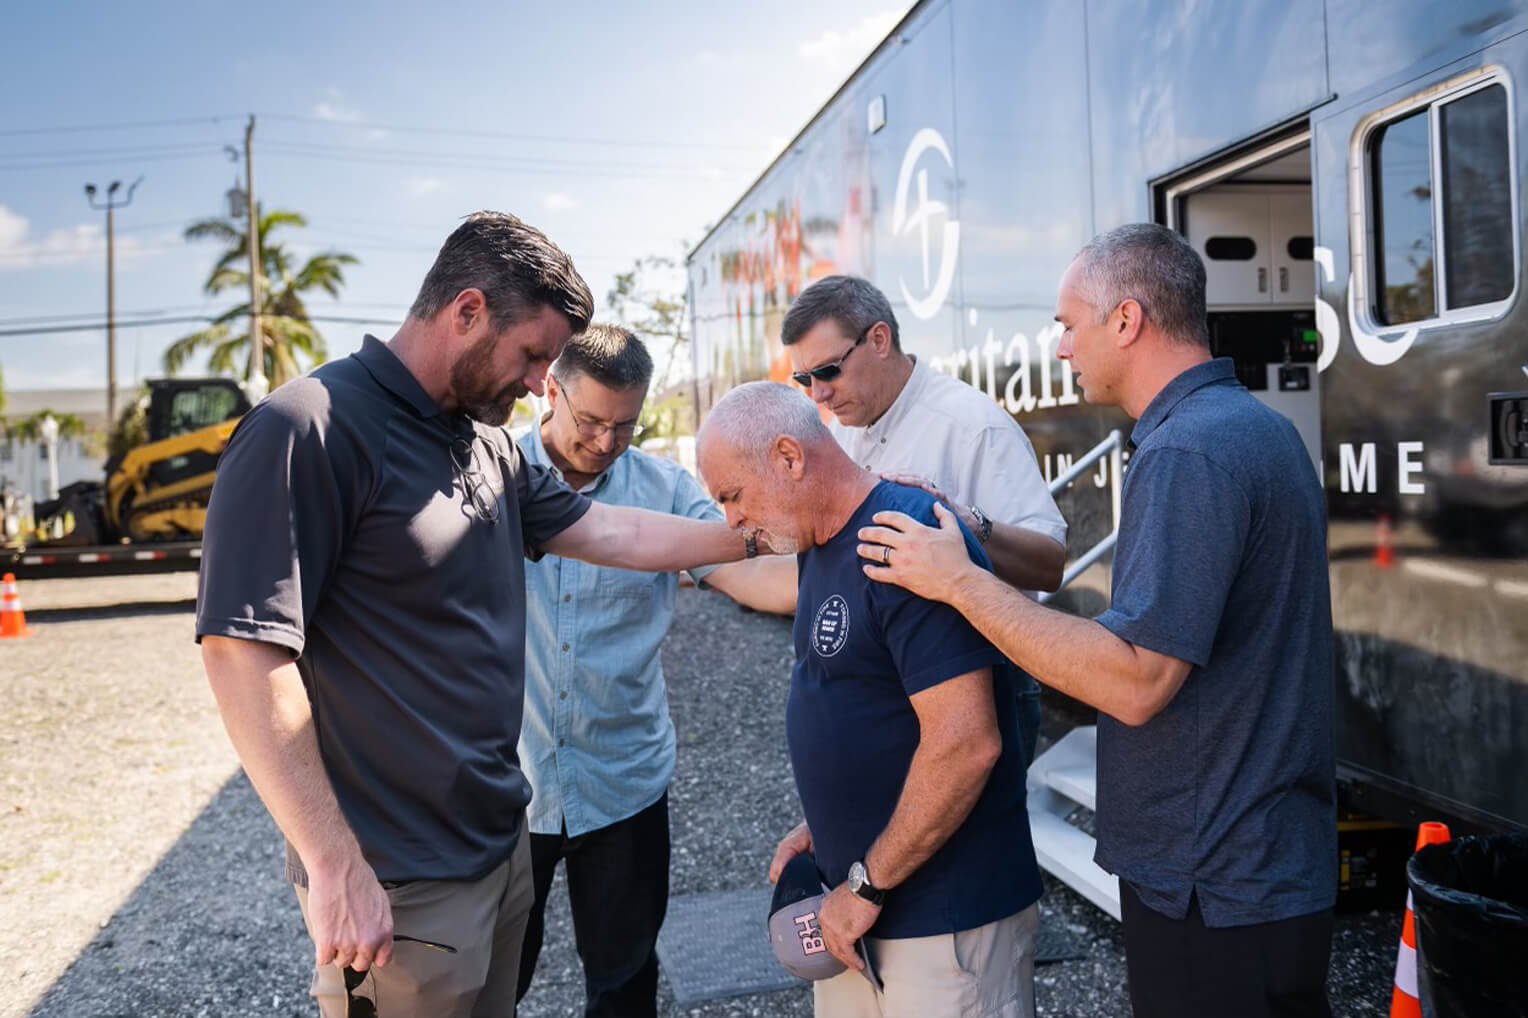 Edward Graham and other Samaritan's Purse leadership met and prayed with homeowners, volunteers, and pastors in southwest Florida.